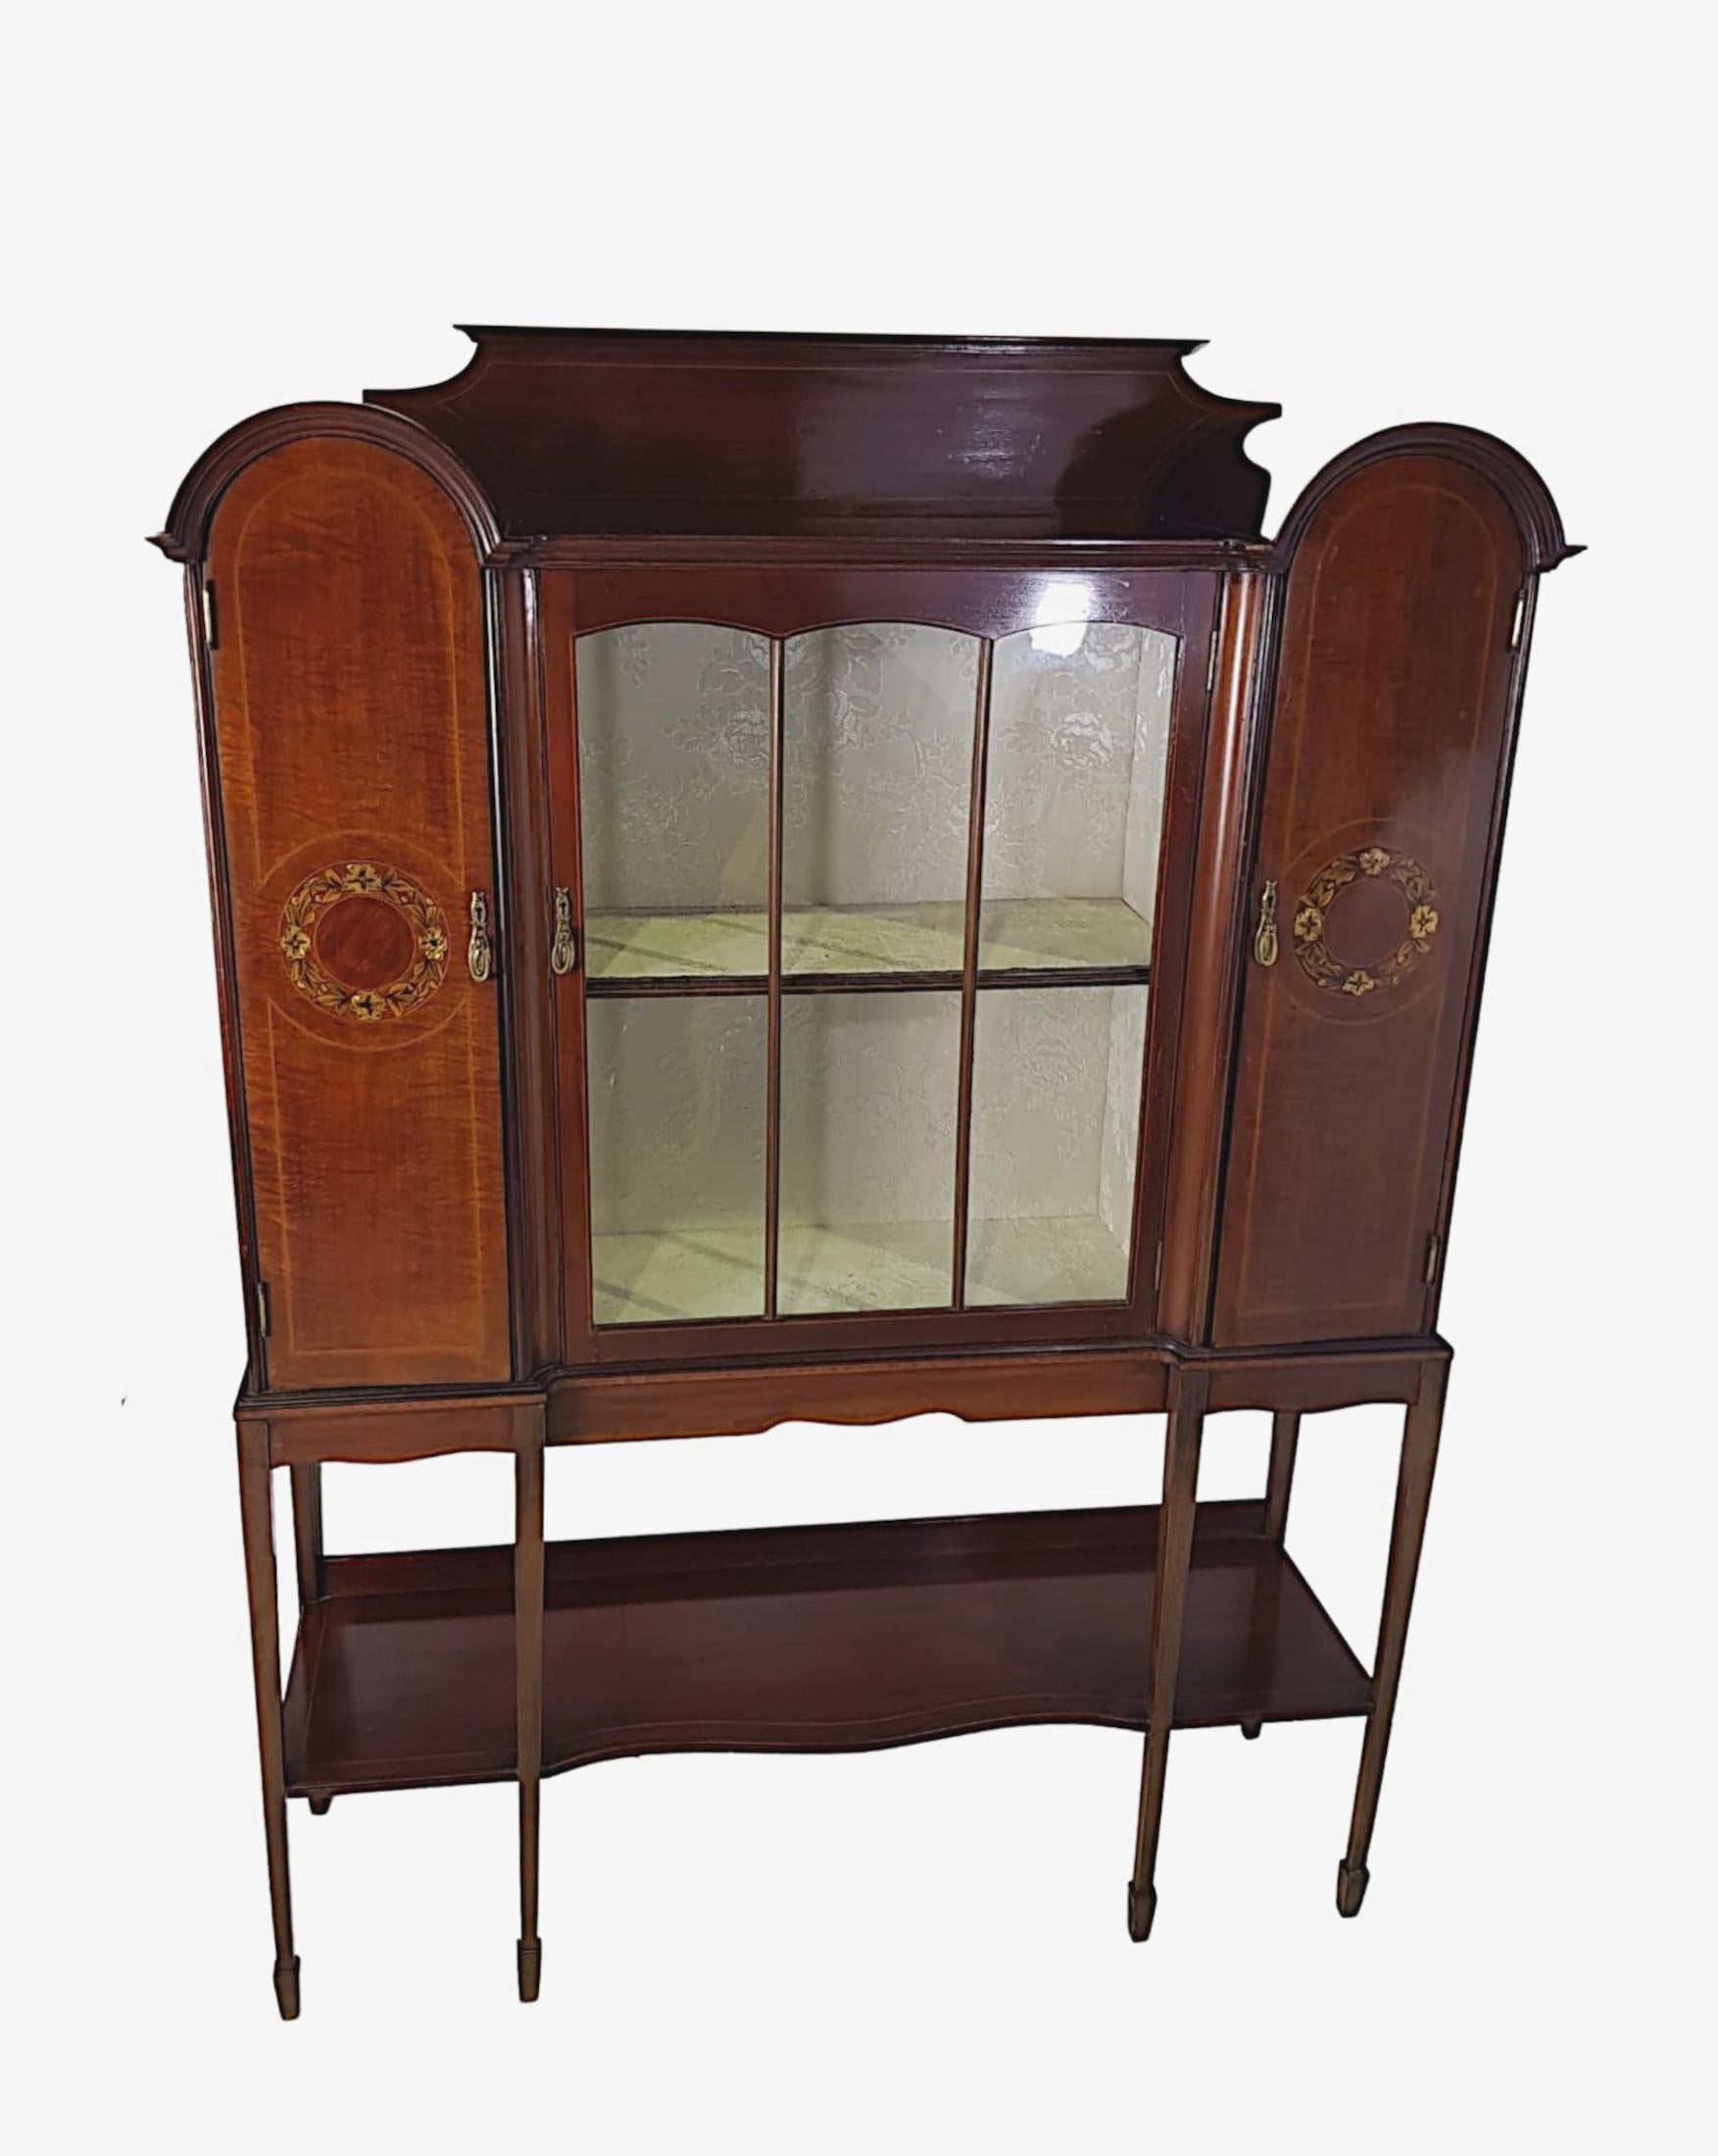 Stunning Pair of Edwardian Inlaid Mahogany Display Cases In Good Condition For Sale In Dublin, IE